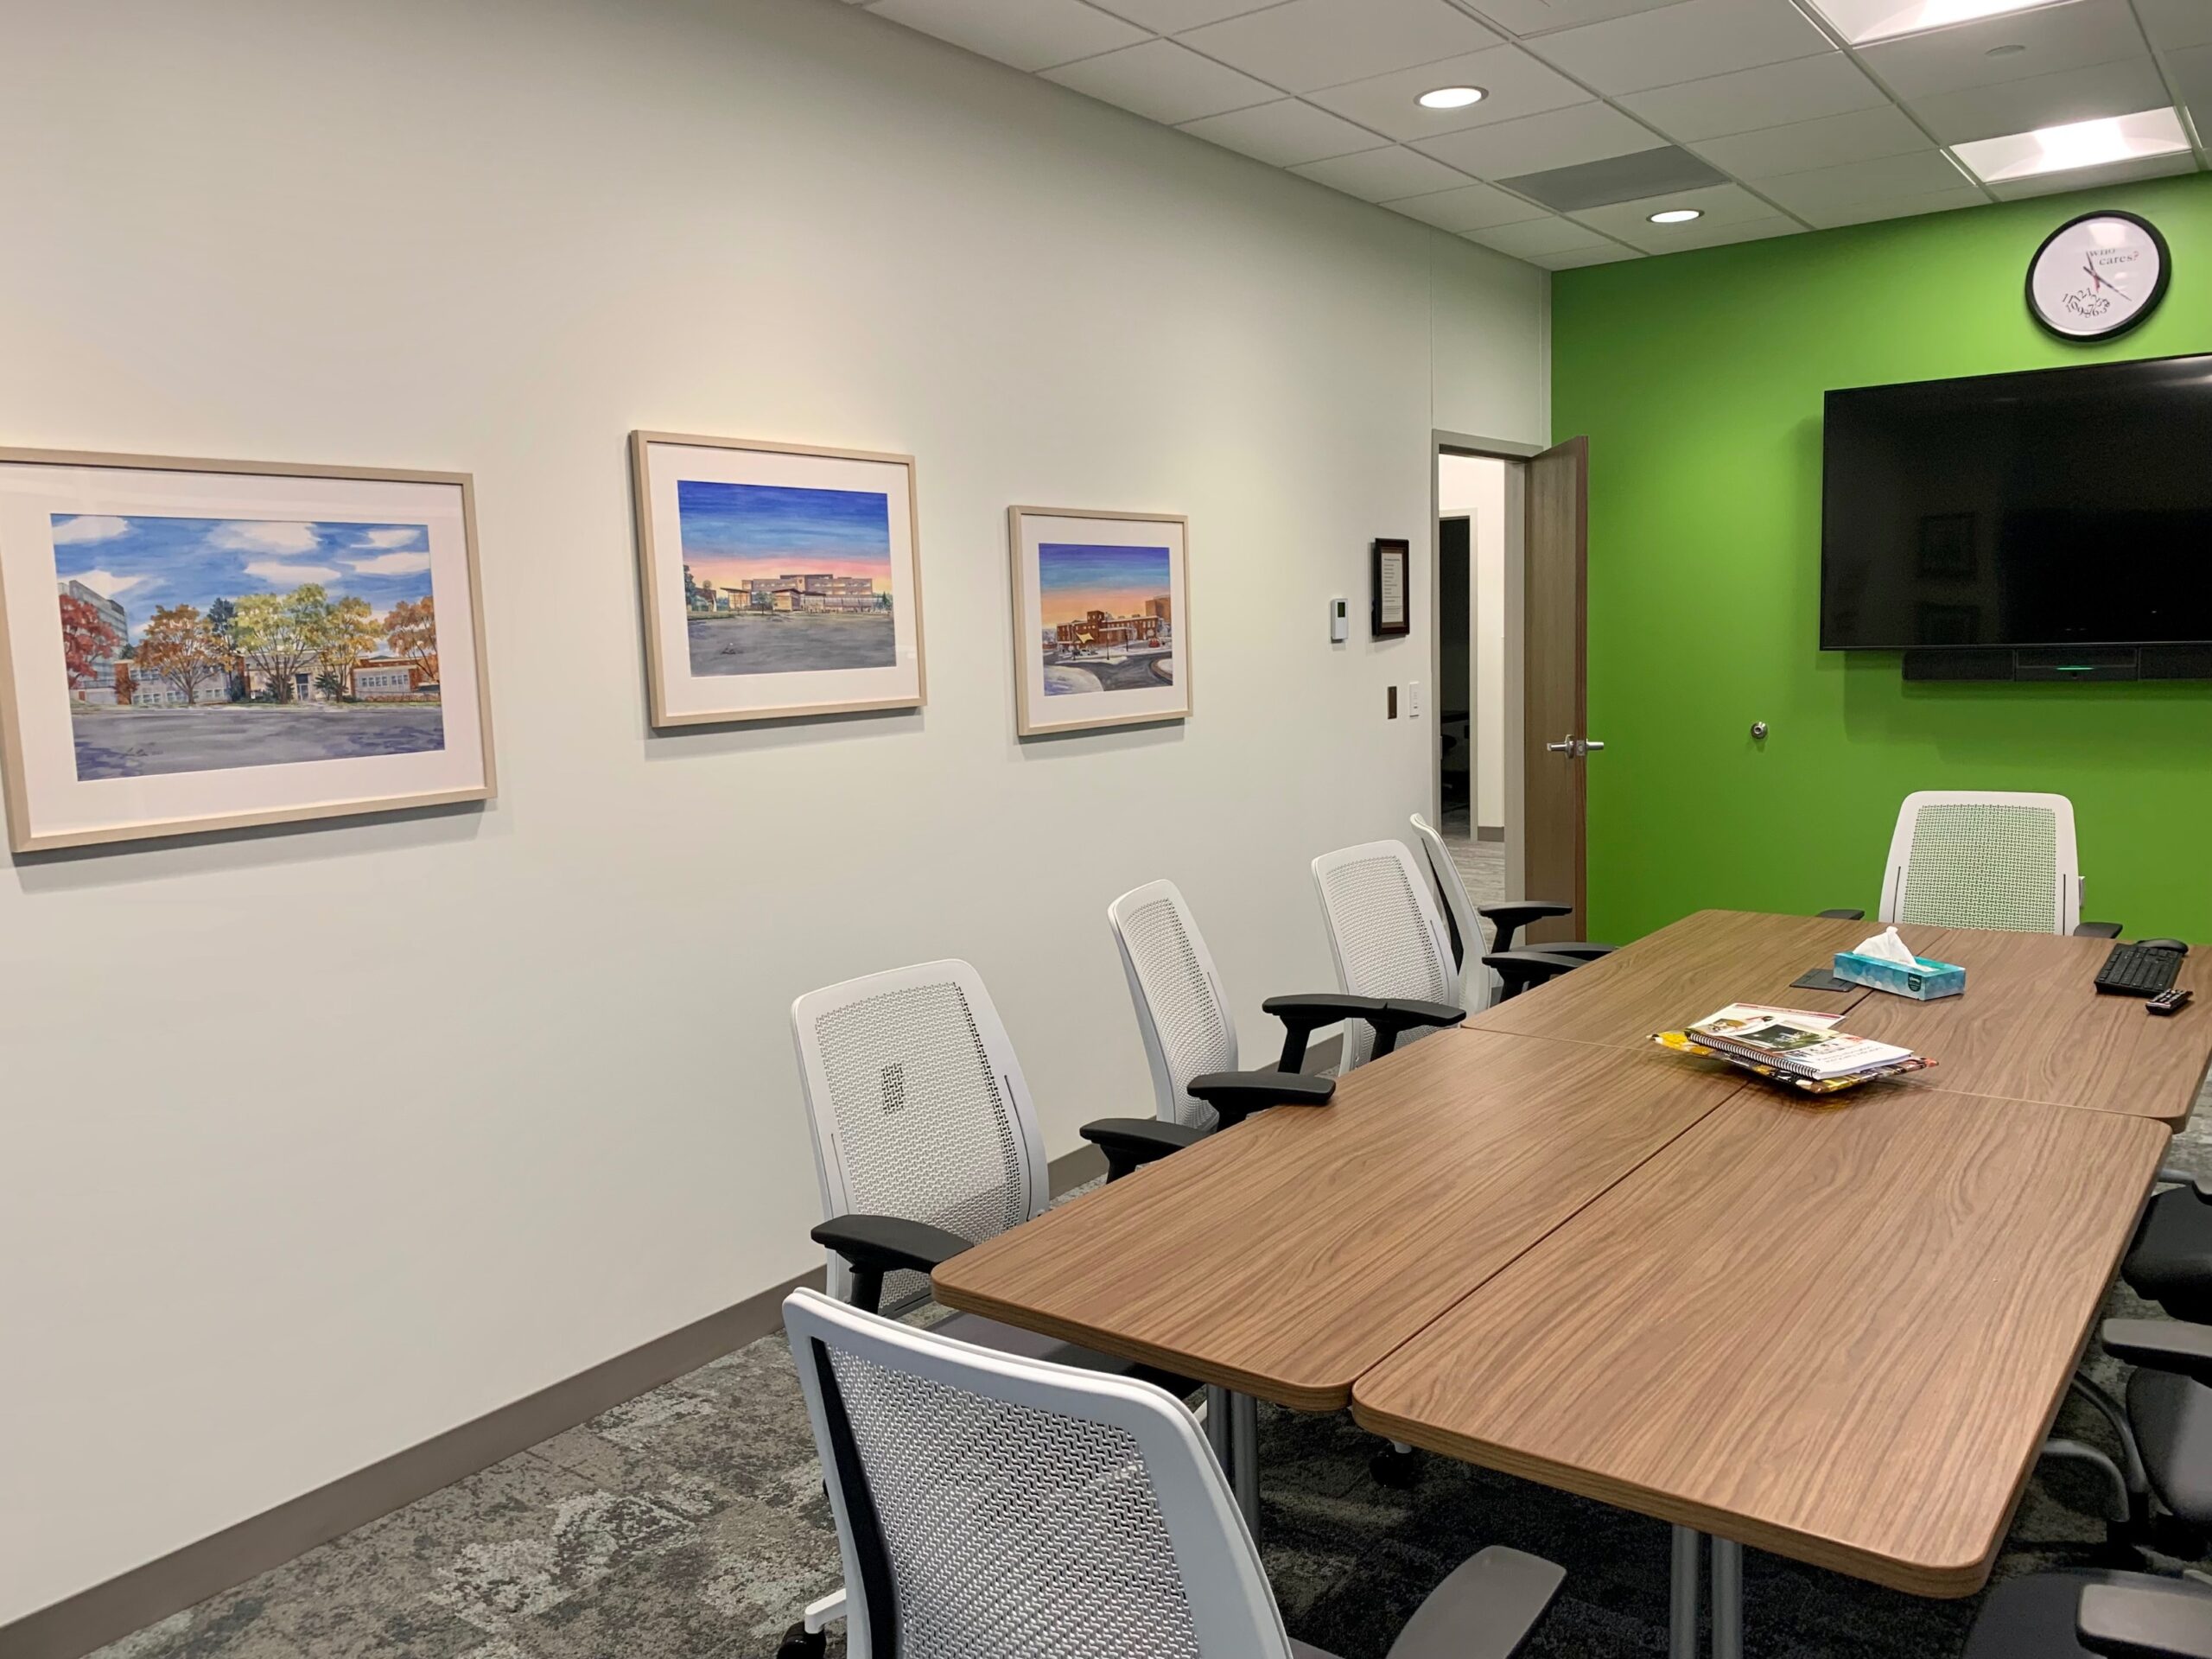 These three commissioned archiectural painting are displyed in a conference room of the Omaha Medical Institute in Nebras